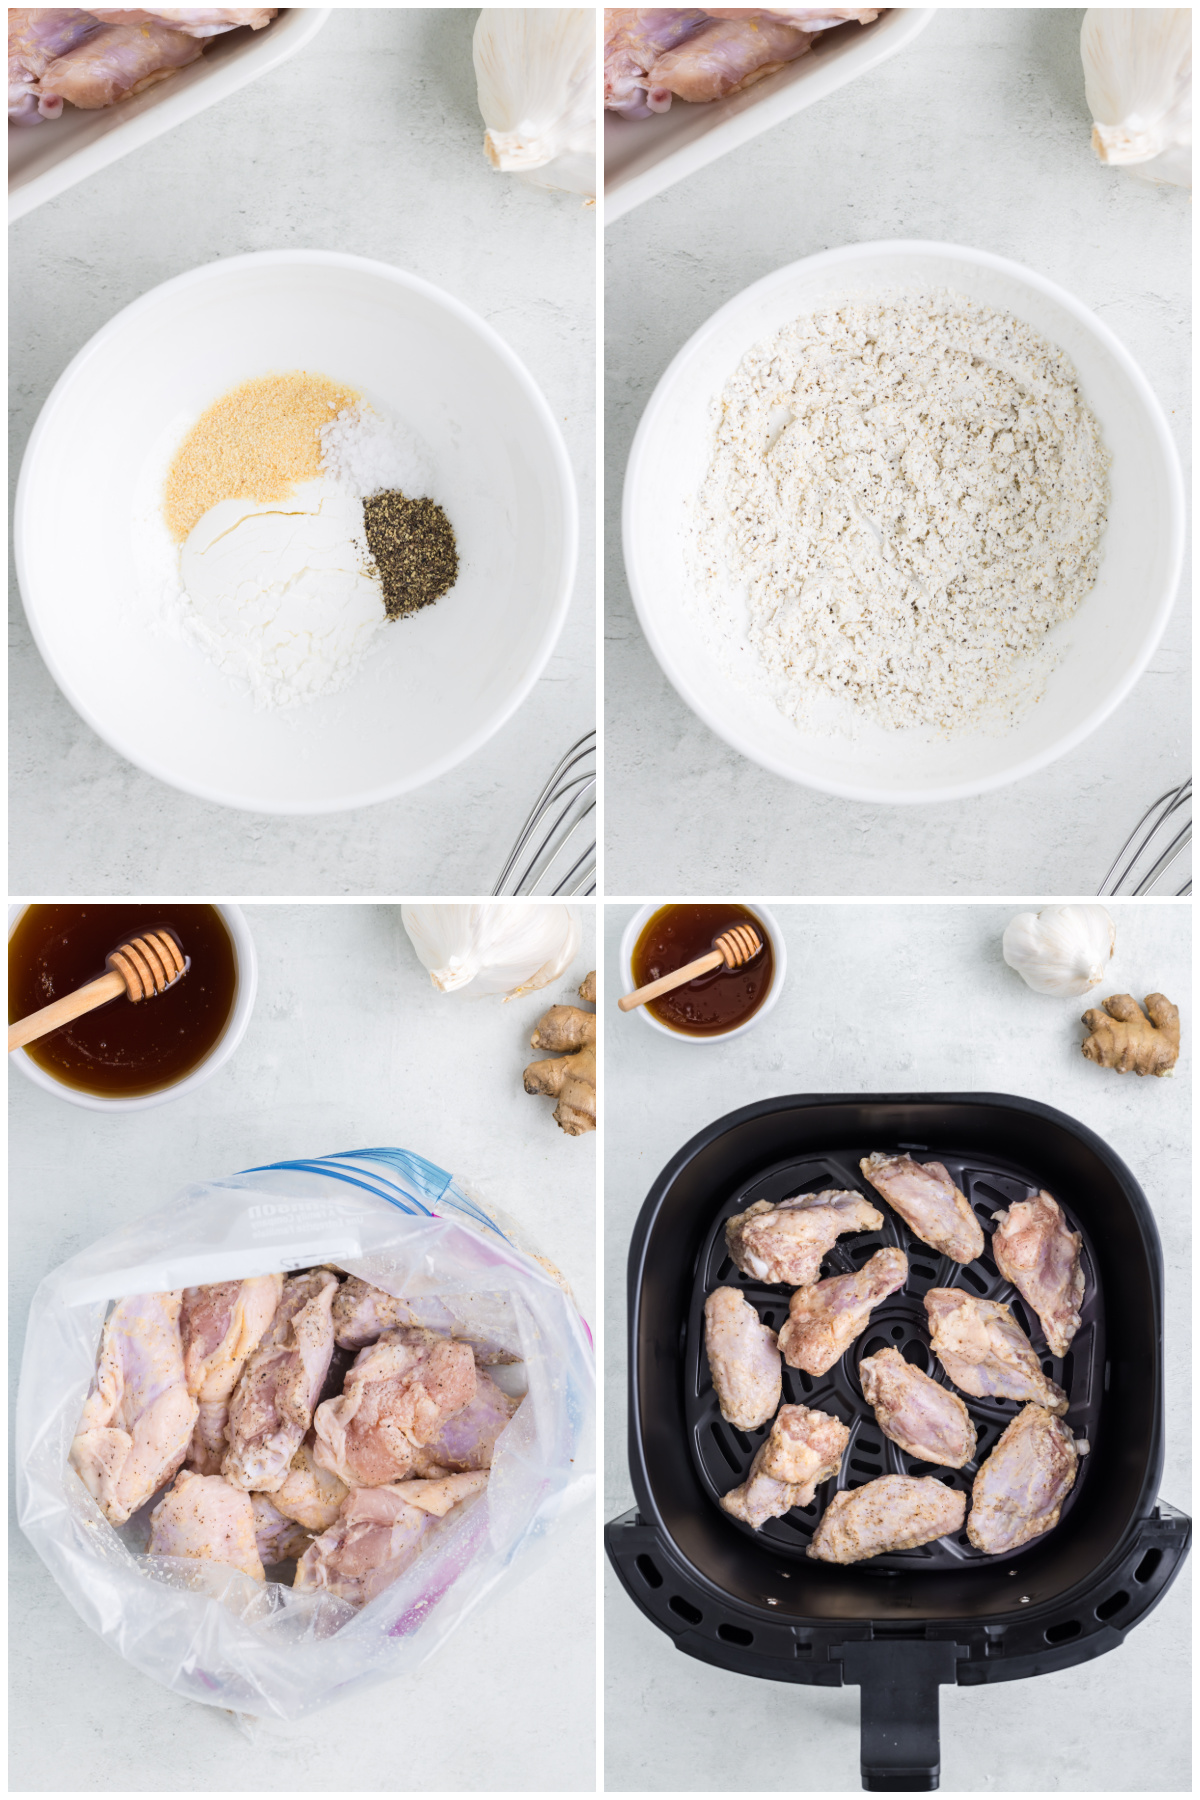 how to make air fryer chicken wings